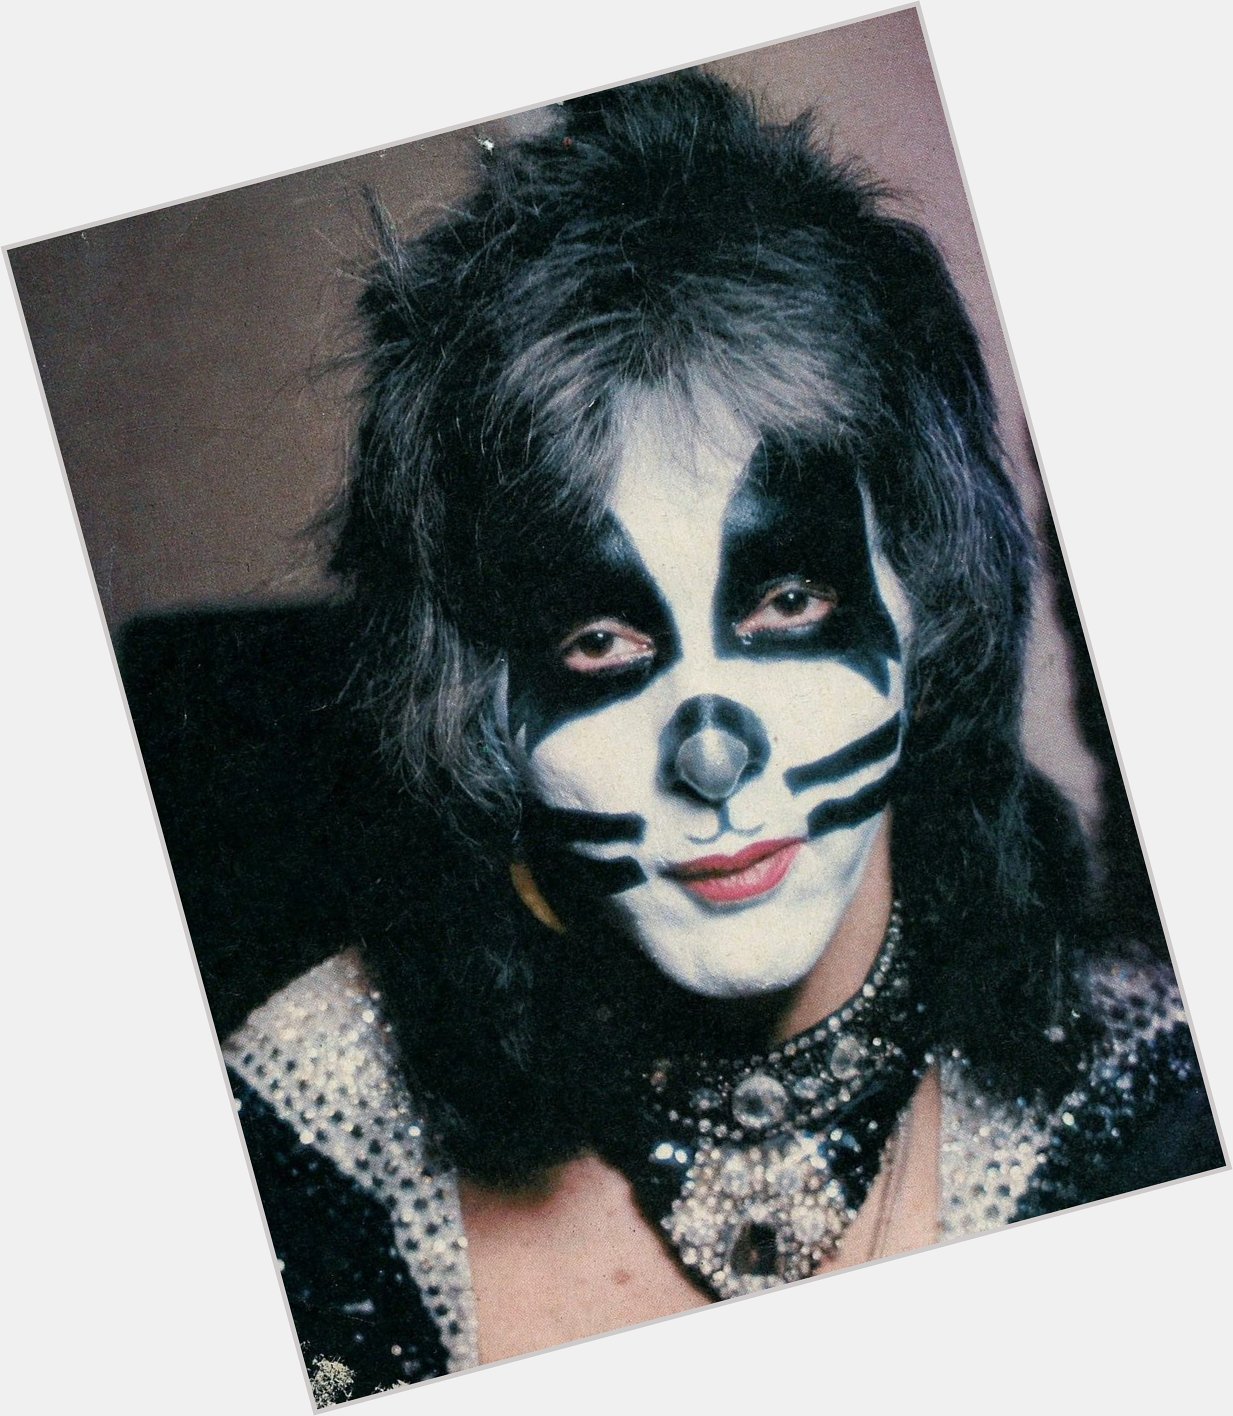 Happy birthday to Peter Criss of the band Kiss. He is 74 years young today December 20, 2019 